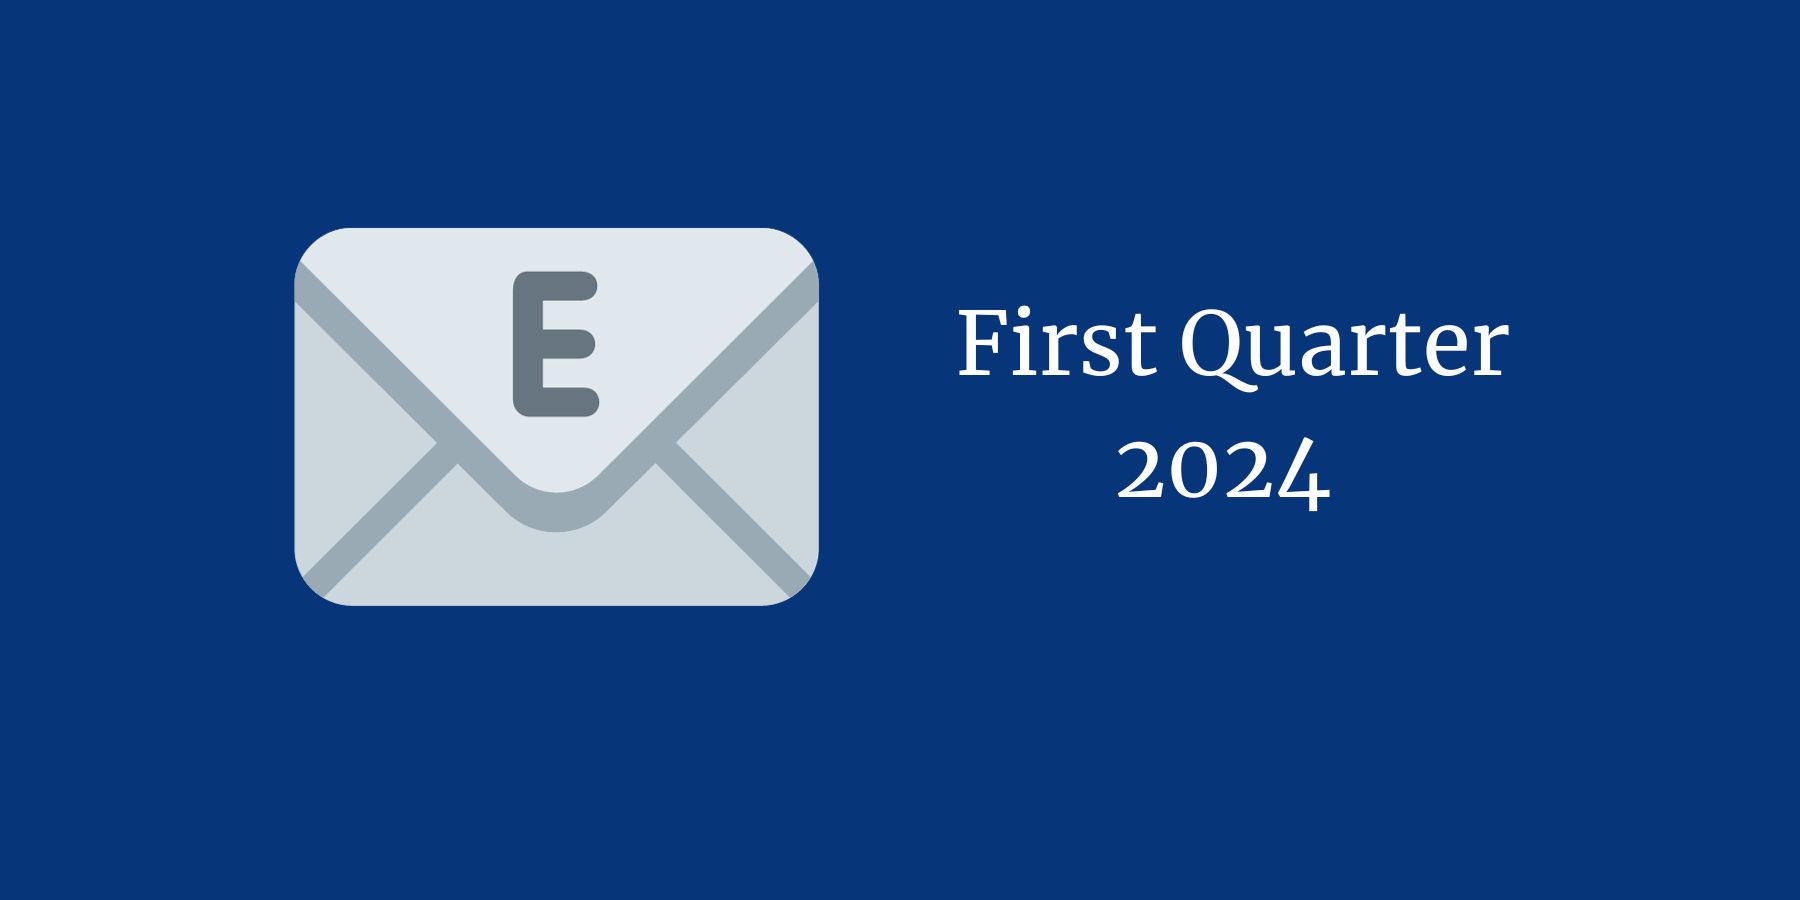 Email icon with text to the right that reads "First Quarter 2024"